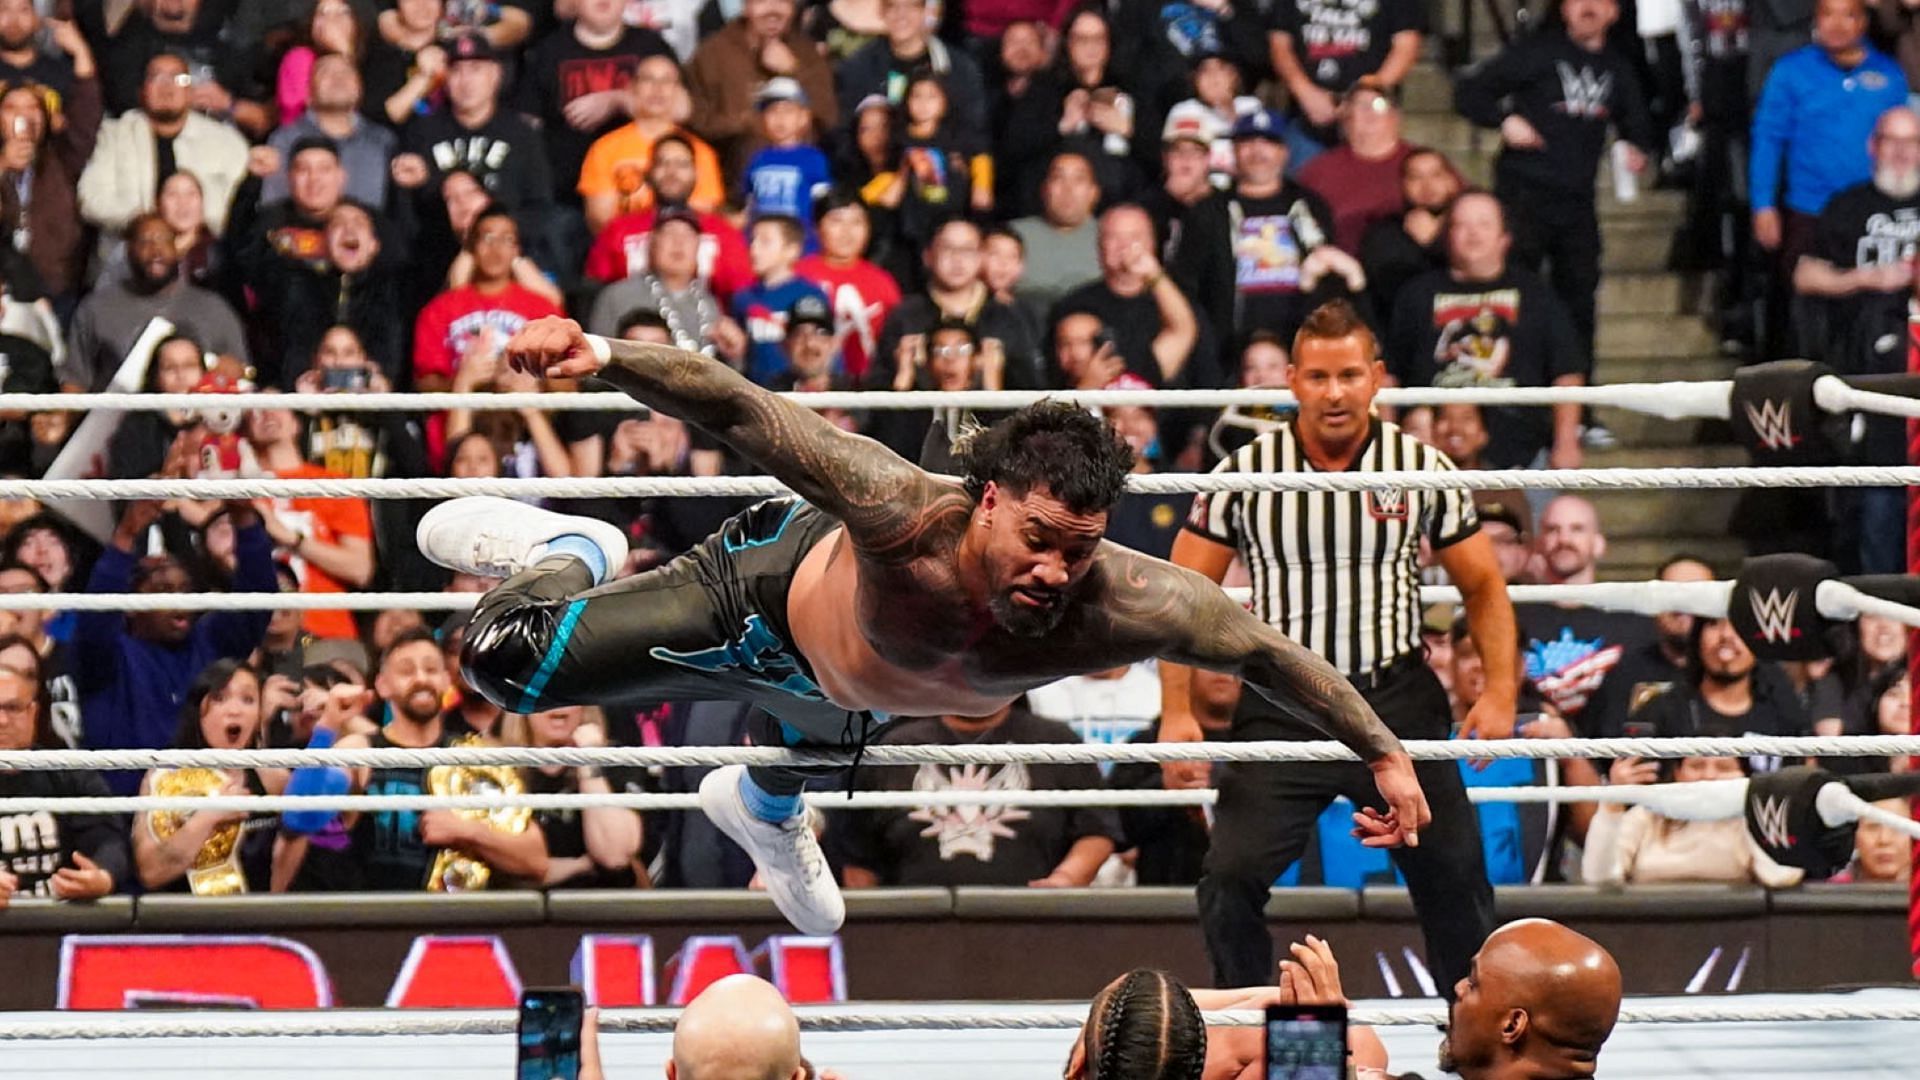 Jey Uso nails a big dive to the floor on WWE RAW